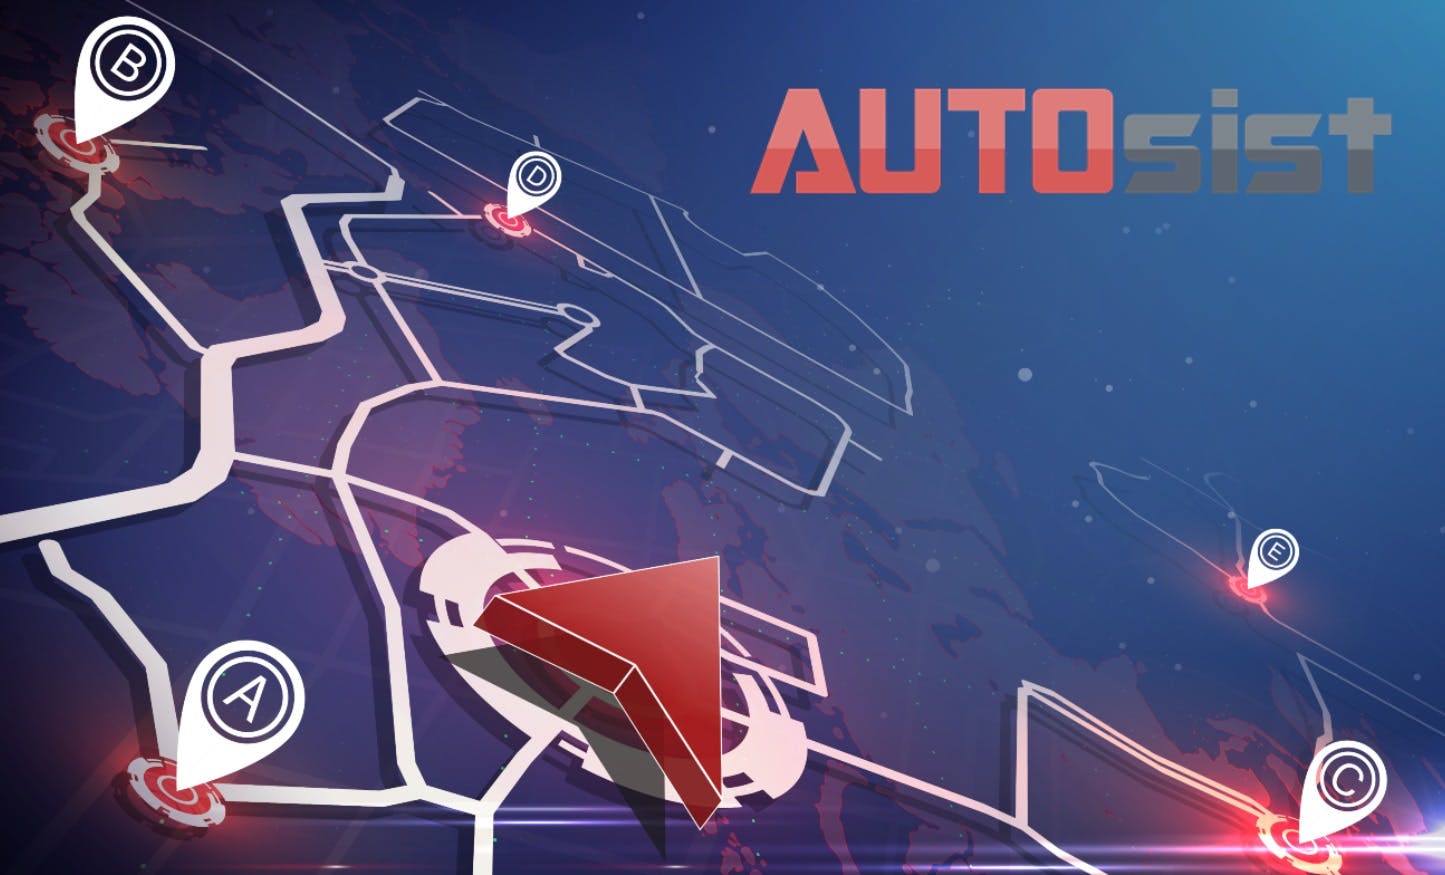 AUTOsist: Full Review, Features and Benefits